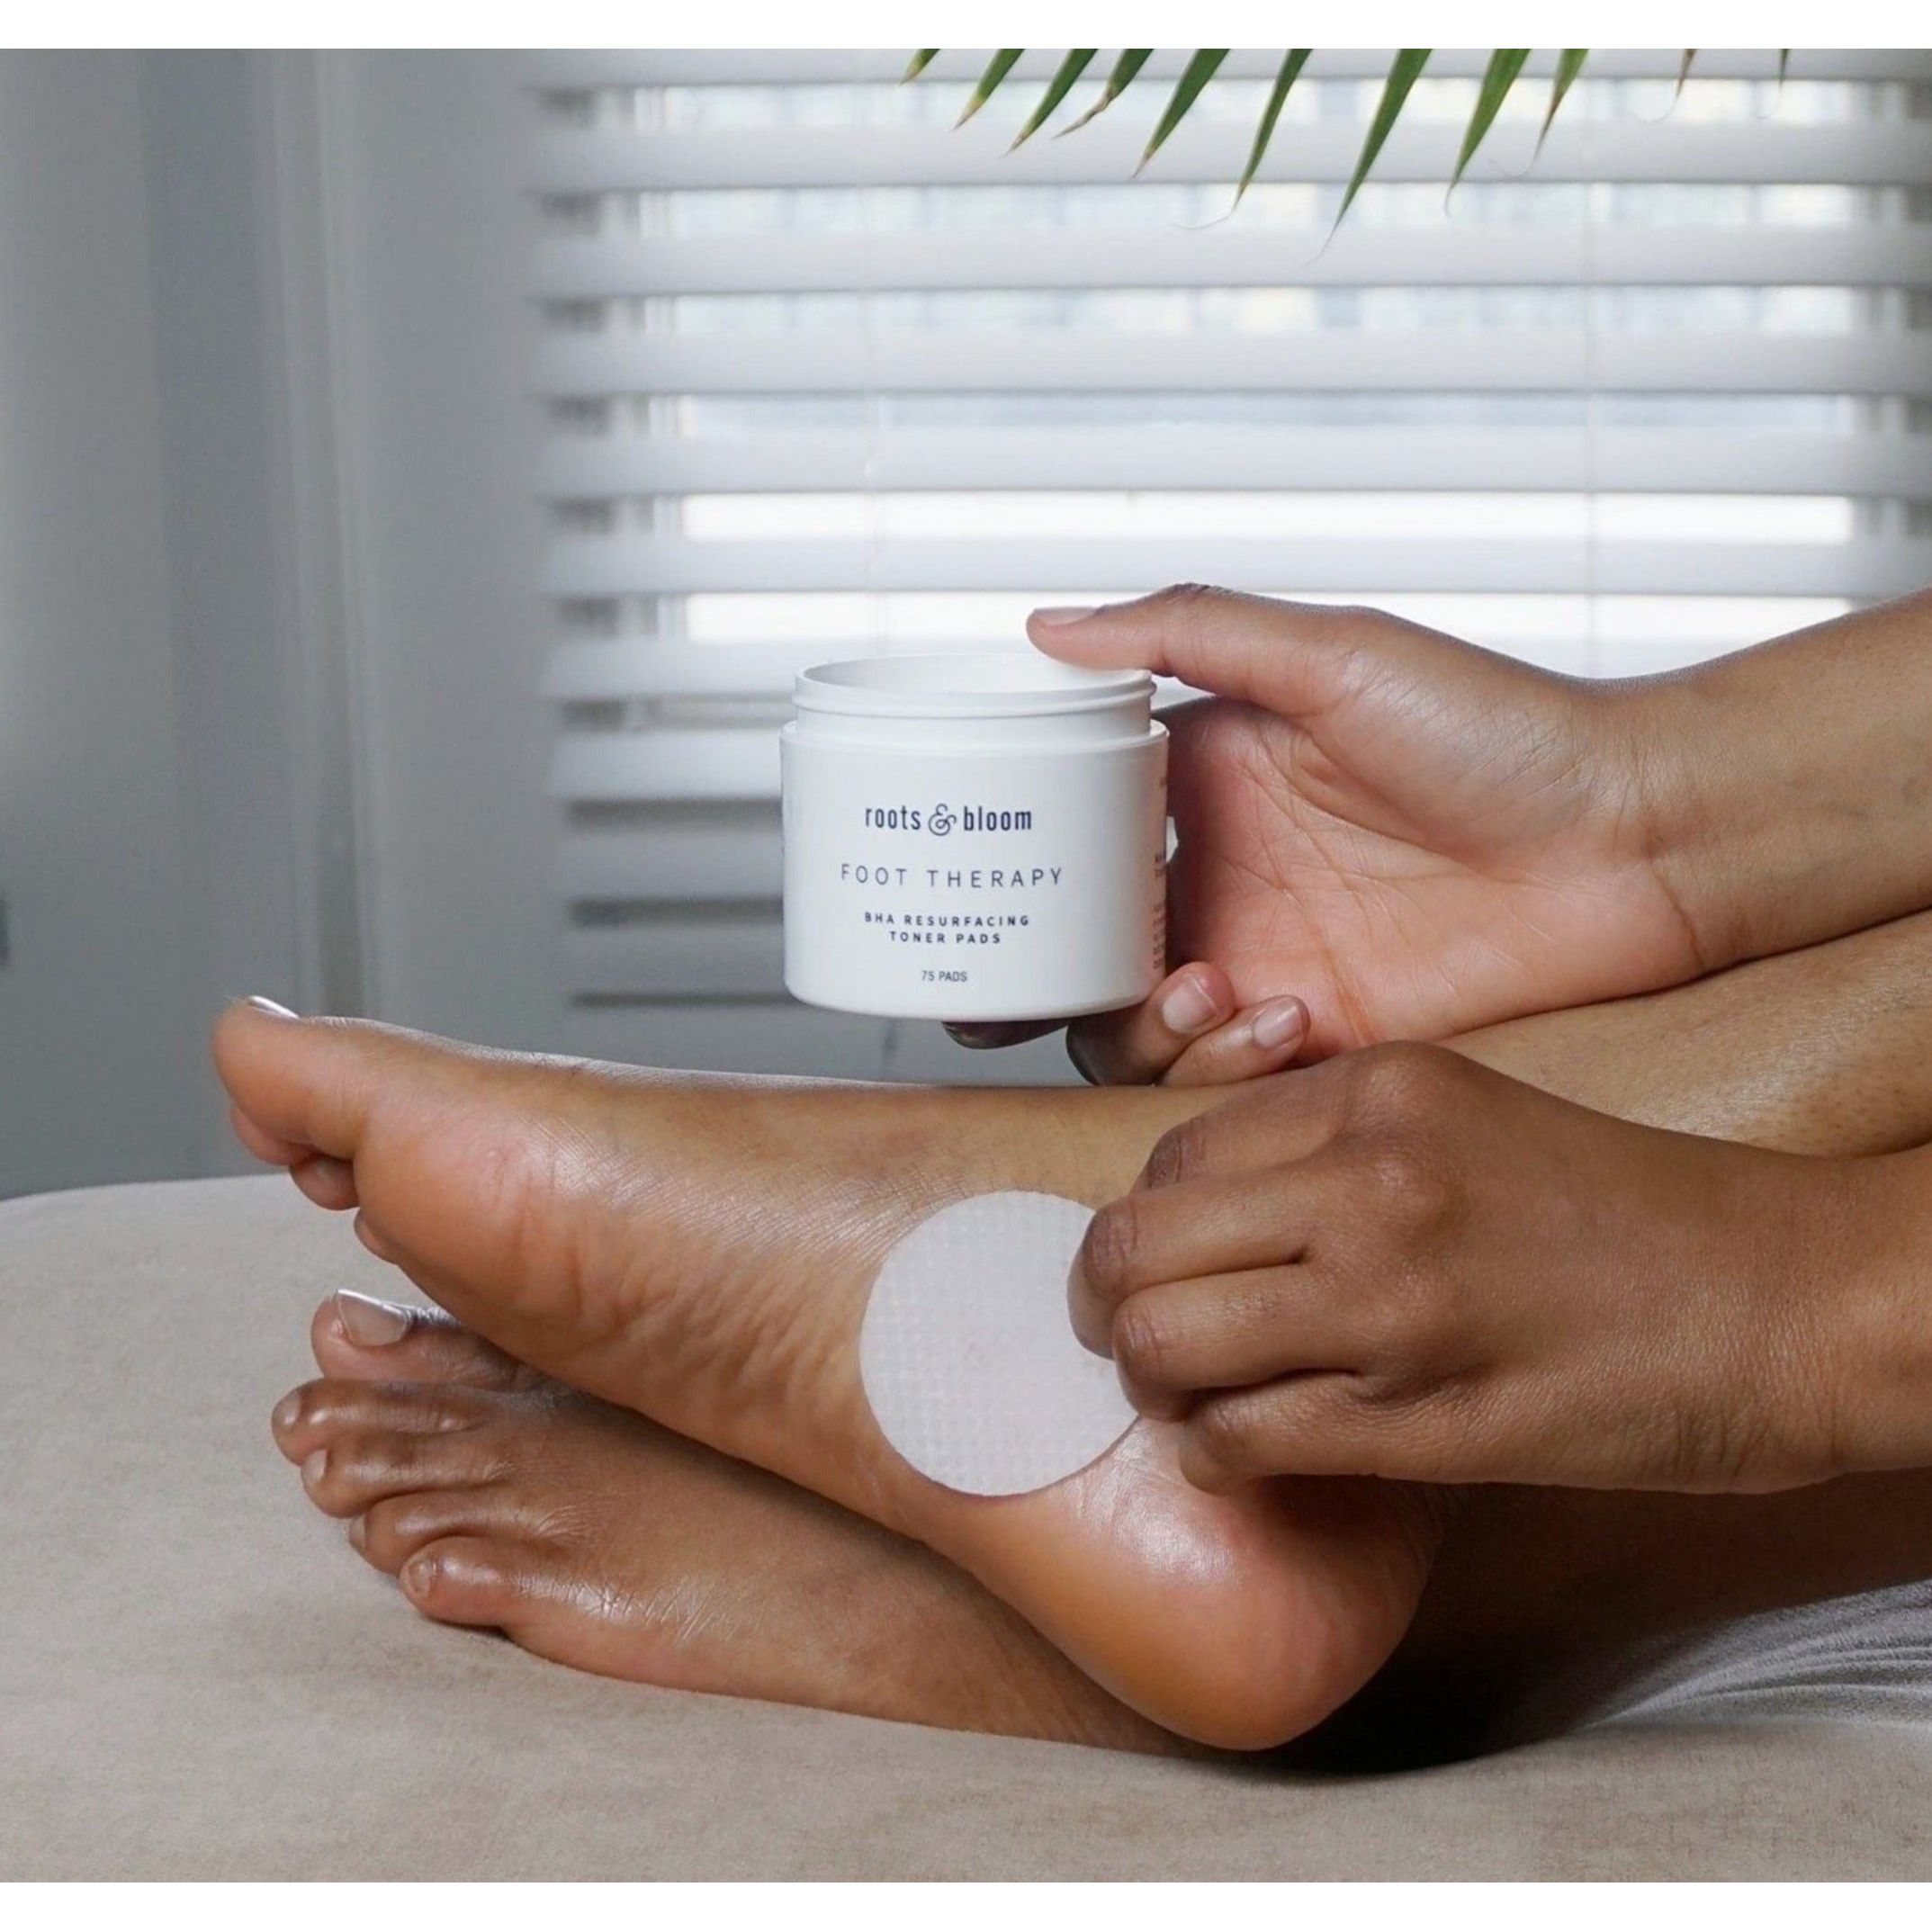 Exfoliating Peel Pad being applied to feet